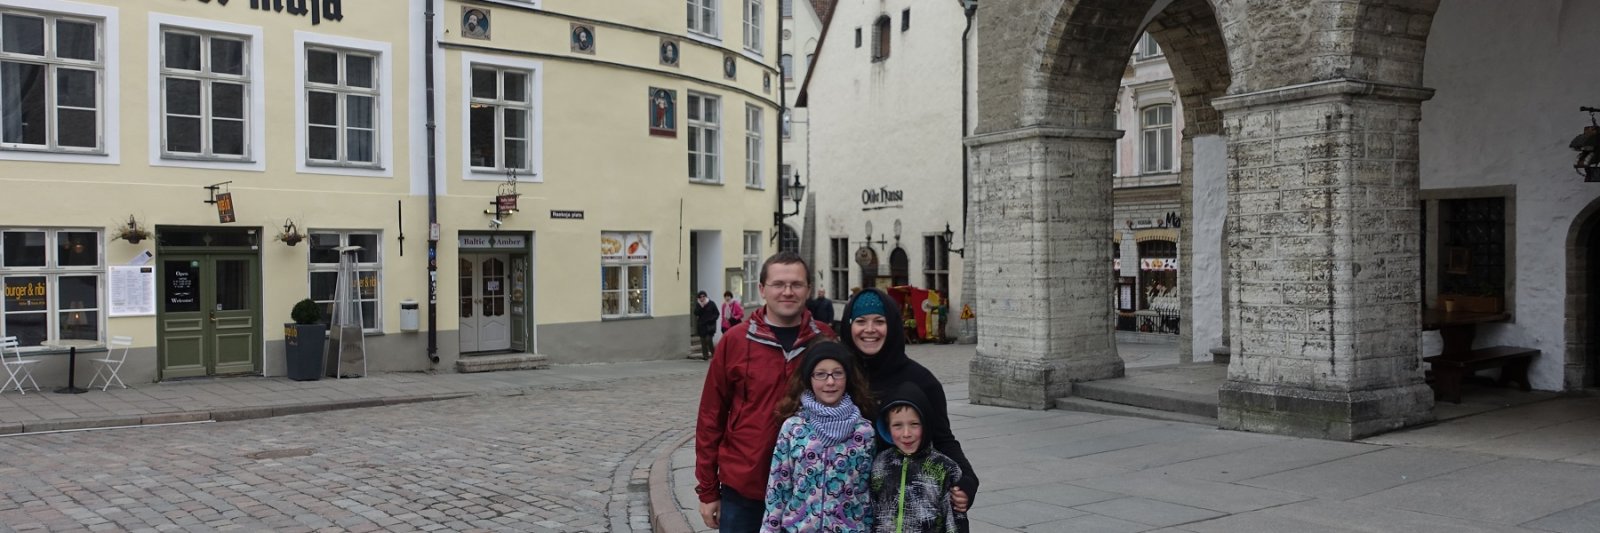 family in front of old buildings